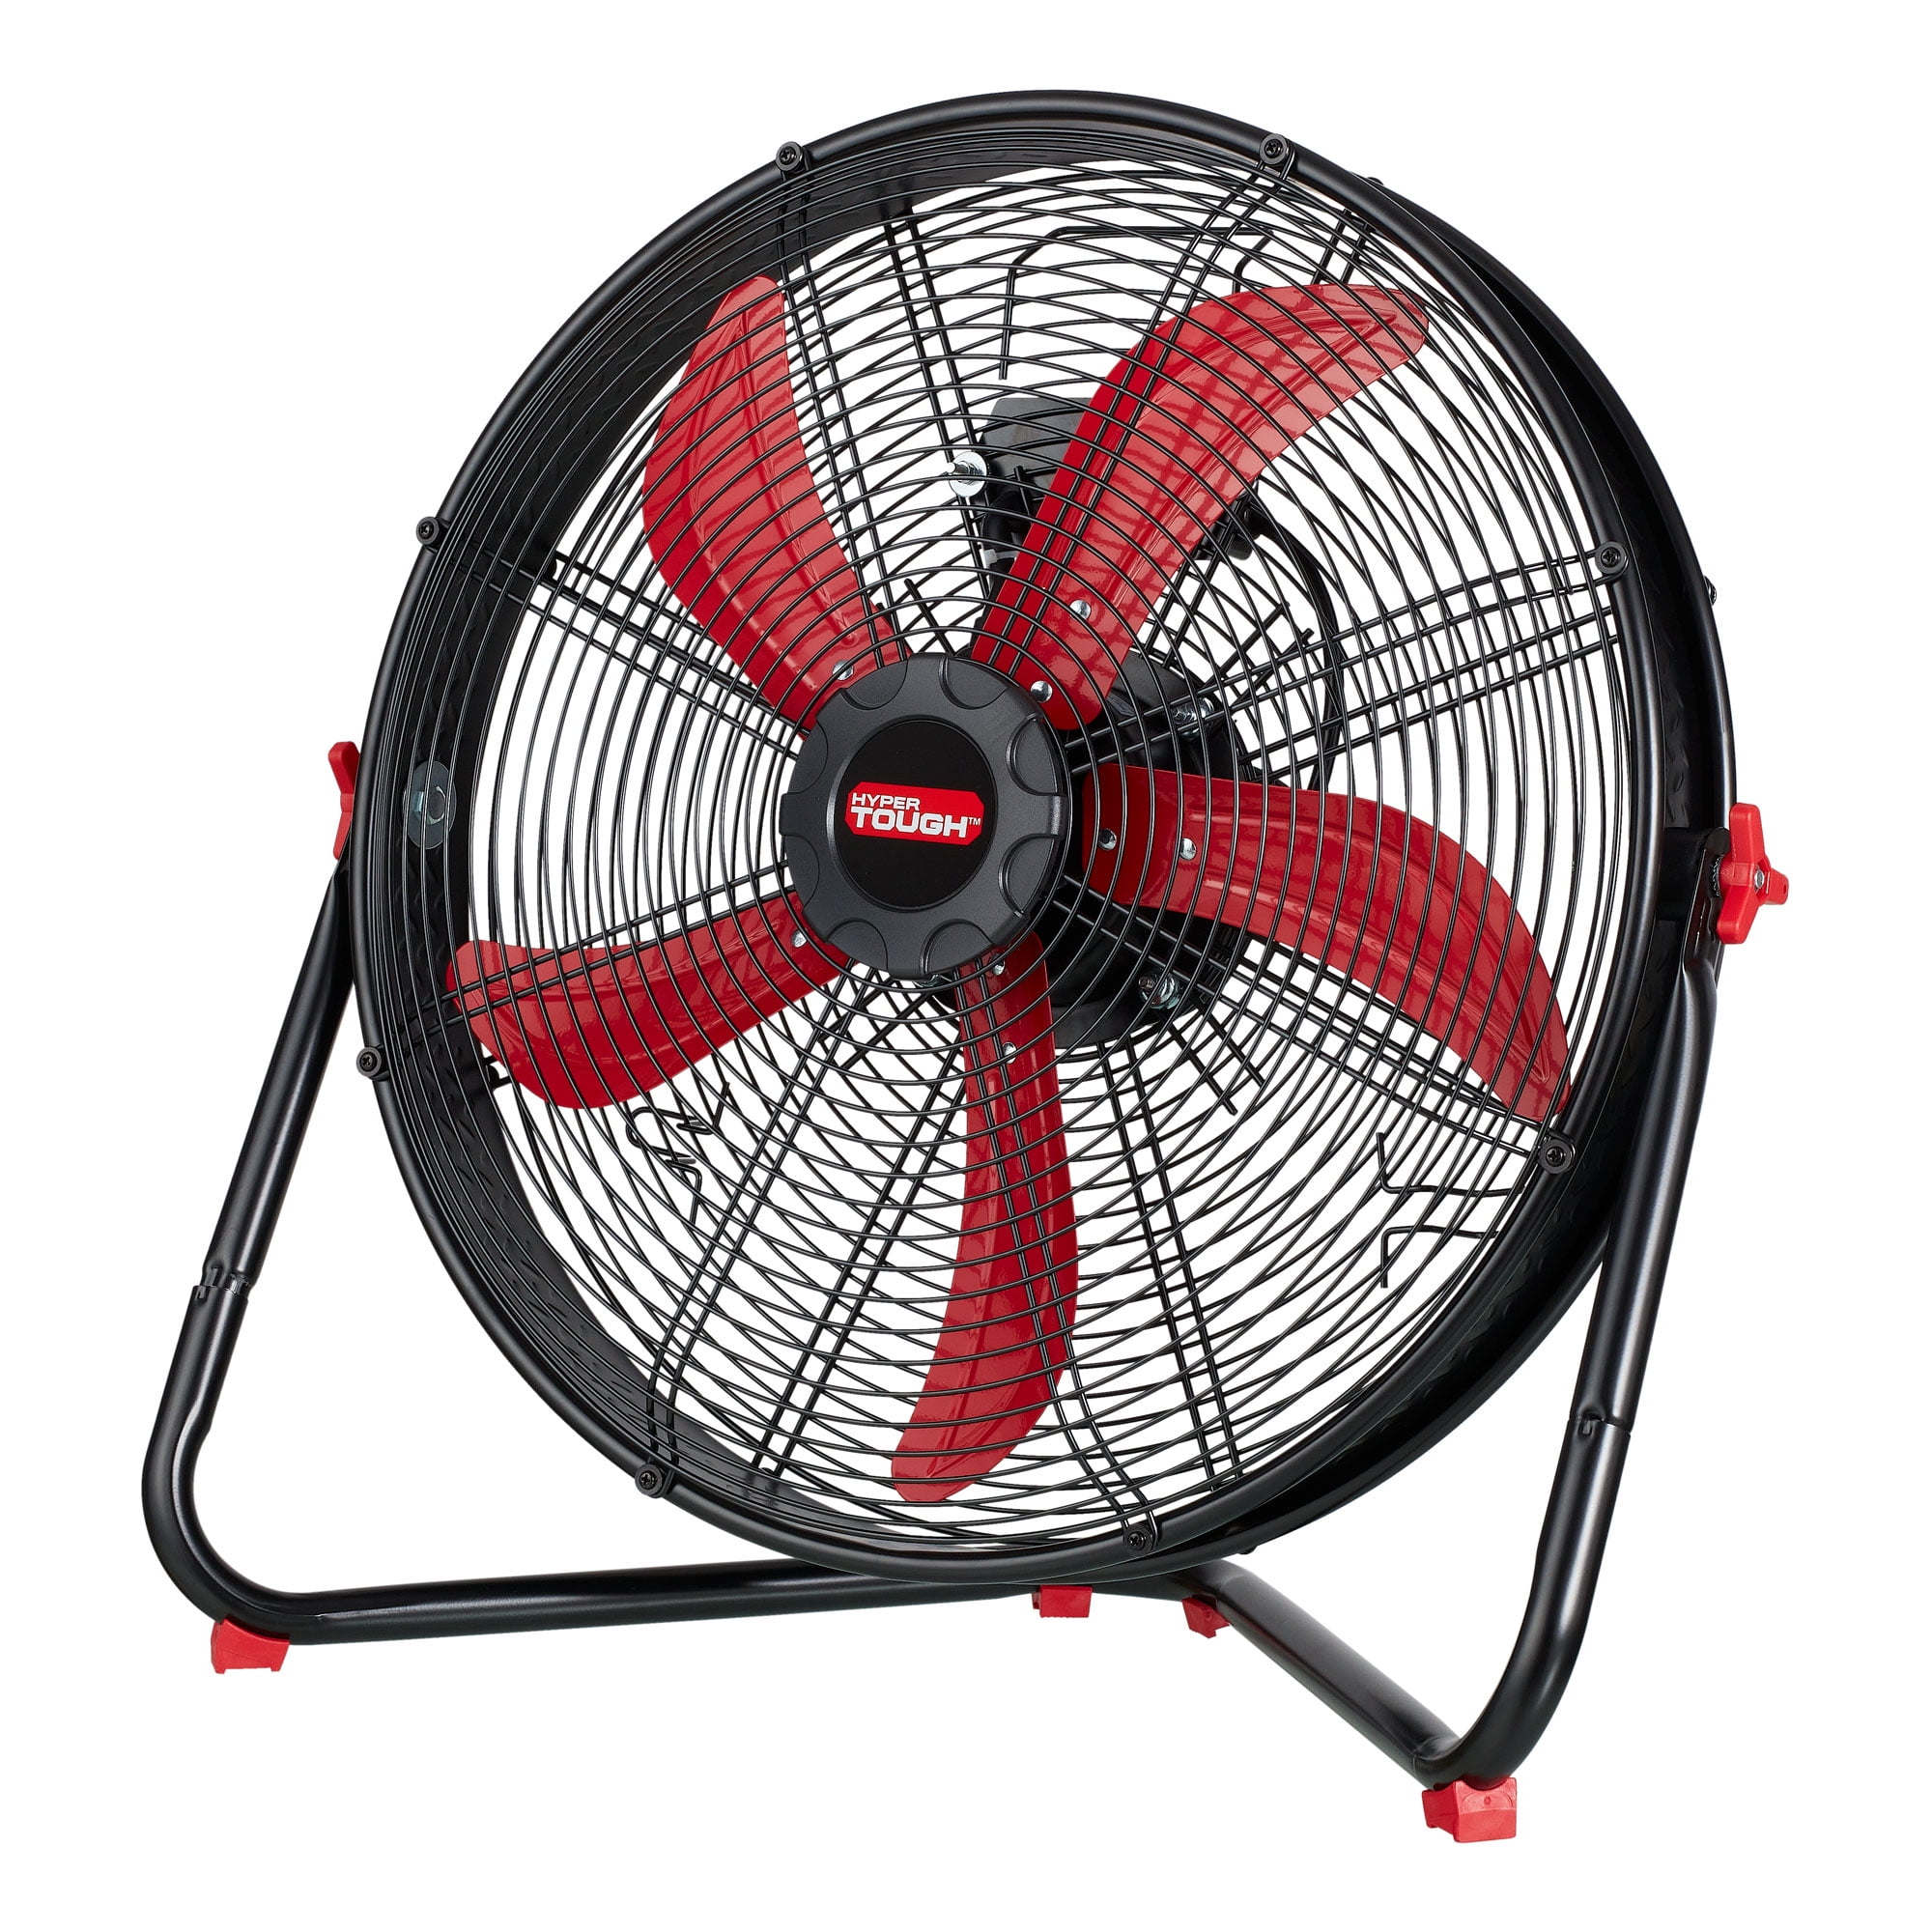 ost Klan Envision Hyper Tough Sealed Motor Drum Fan with Wall Mount, 20-Inches - Walmart.com